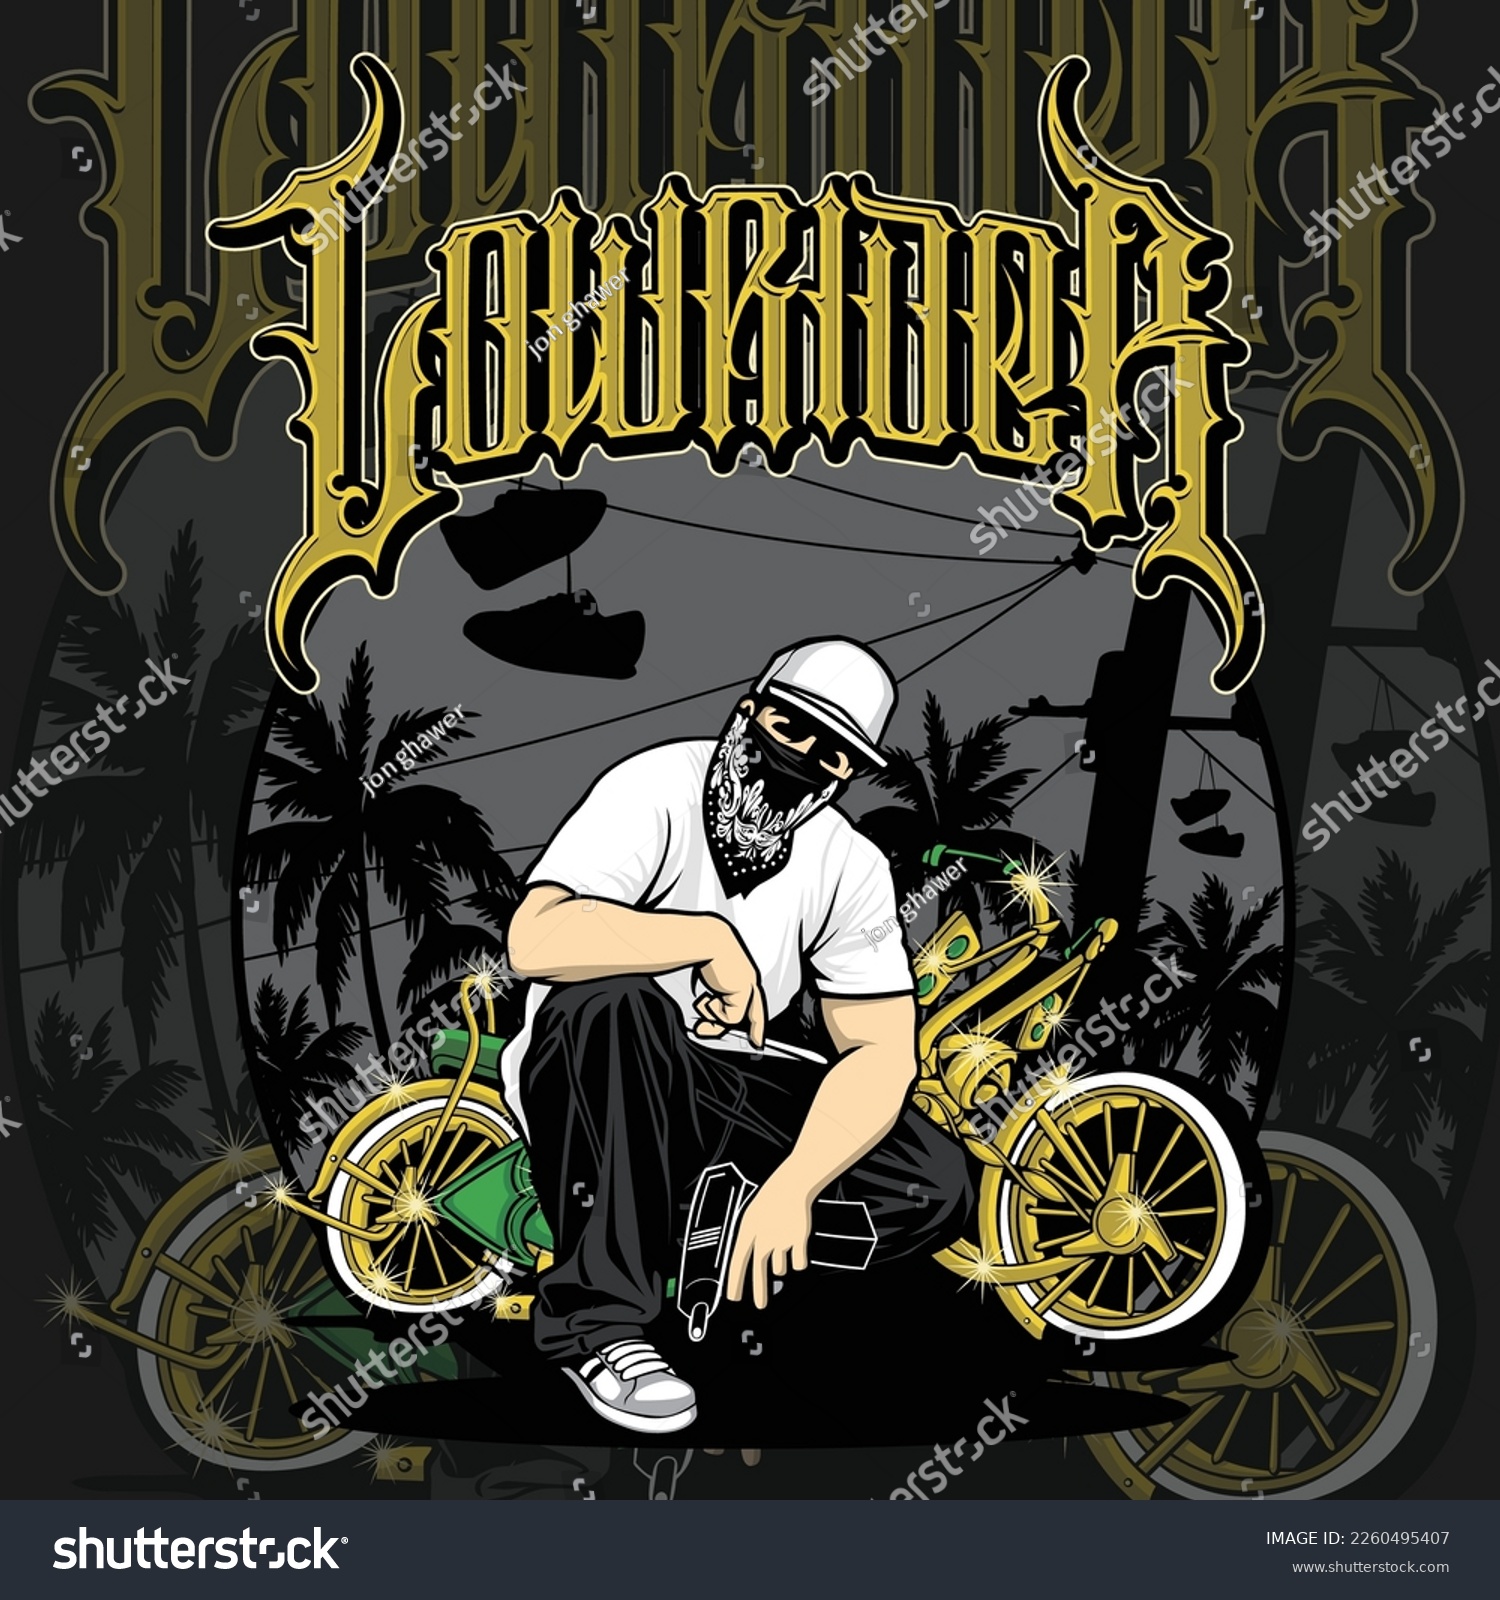 SVG of gangster and lowrider, homies, low, rider, gangs, hiphop svg